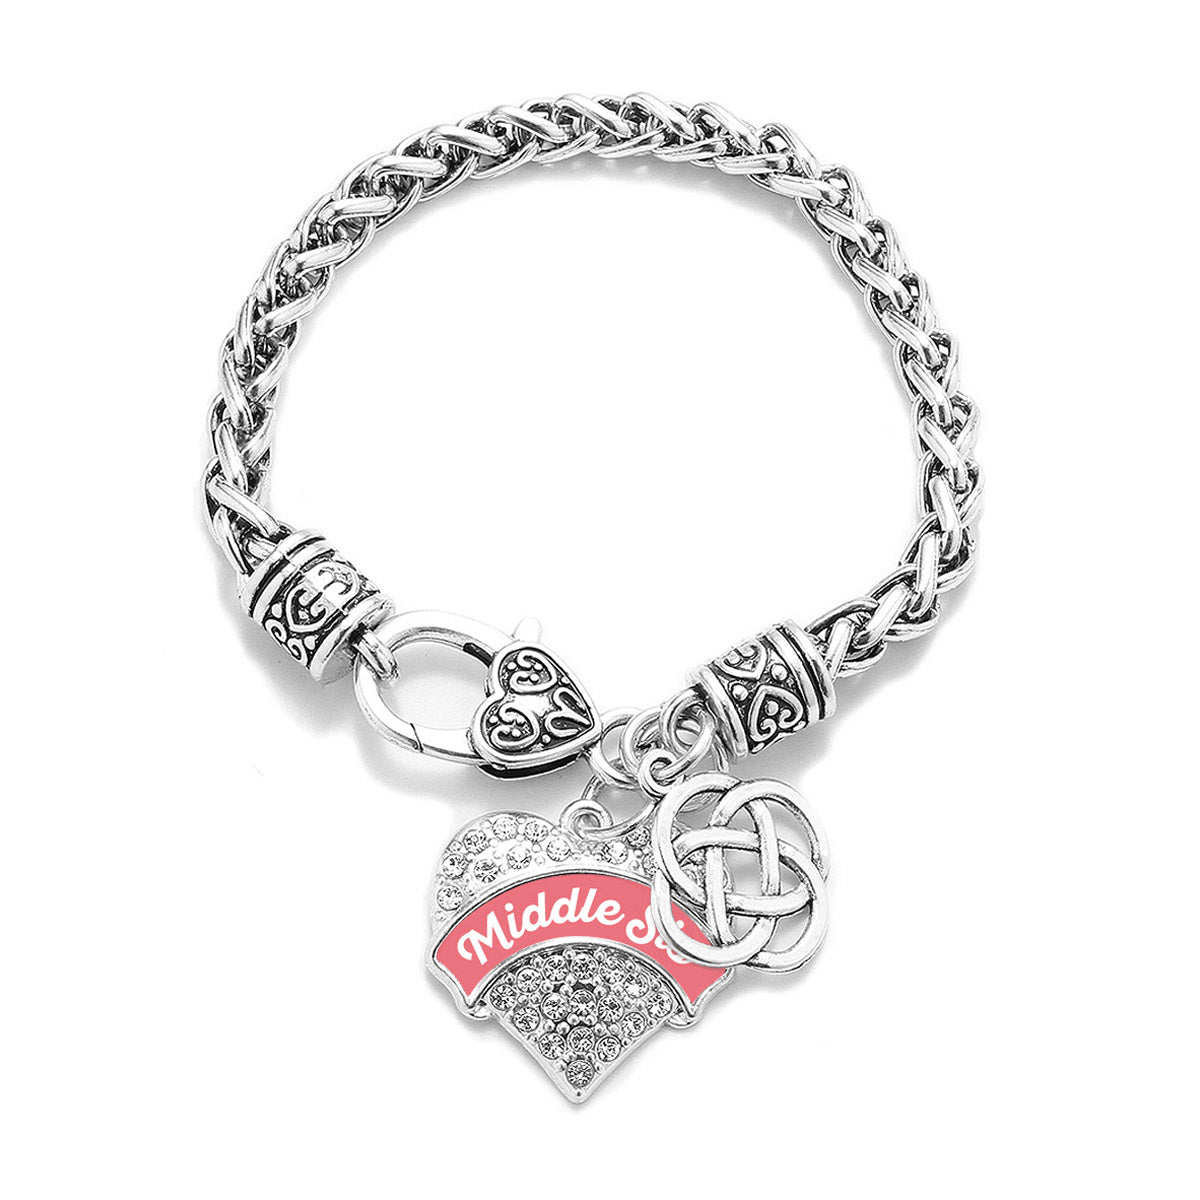 Silver Coral Middle Sis Celtic Knot Pave Heart Charm Braided Bracelet